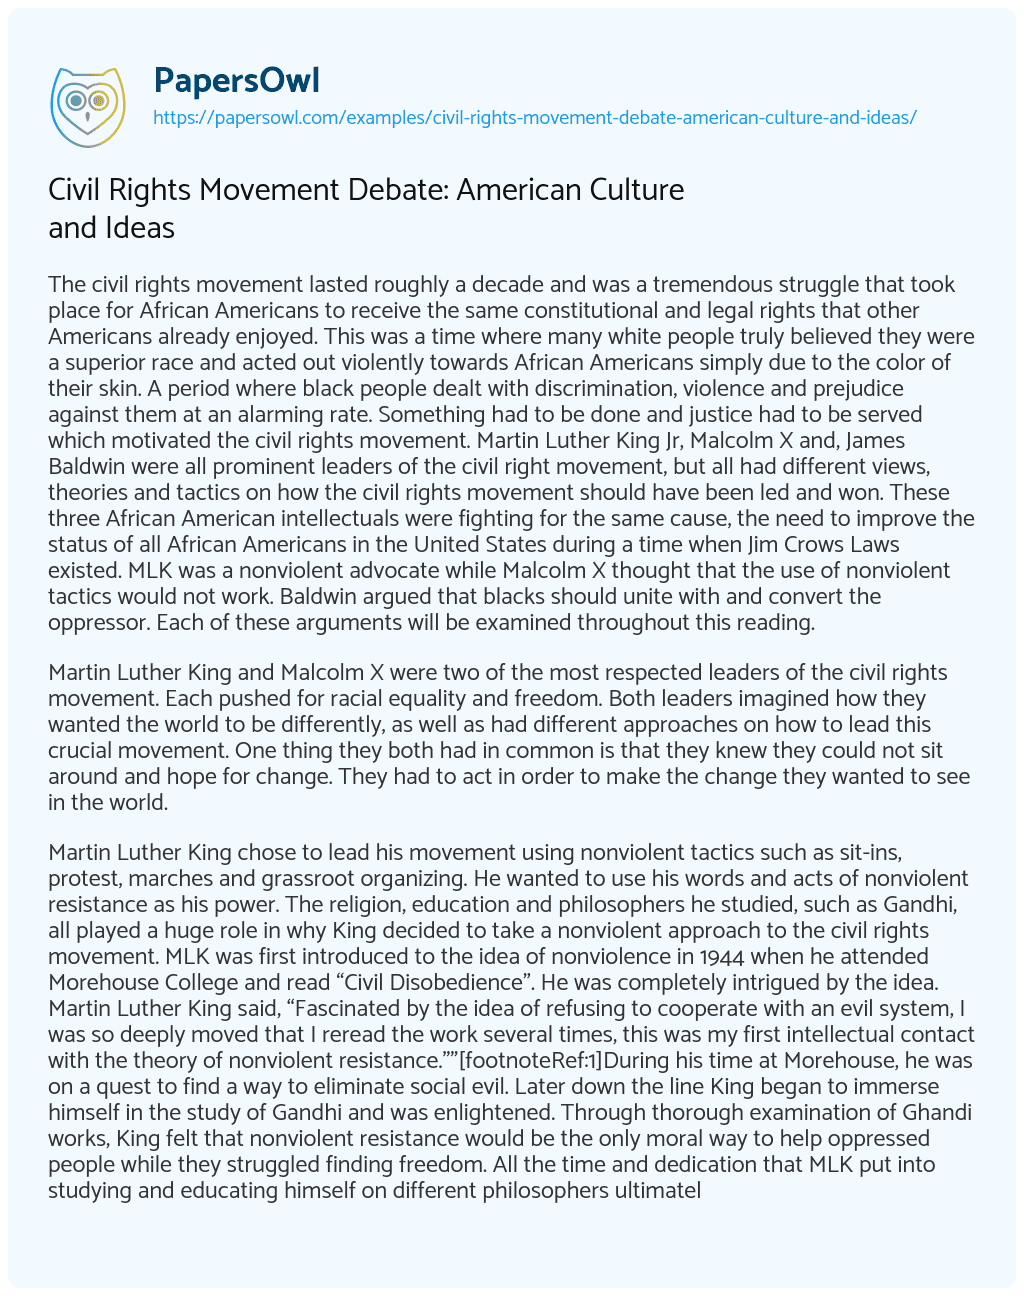 Essay on Civil Rights Movement Debate: American Culture and Ideas